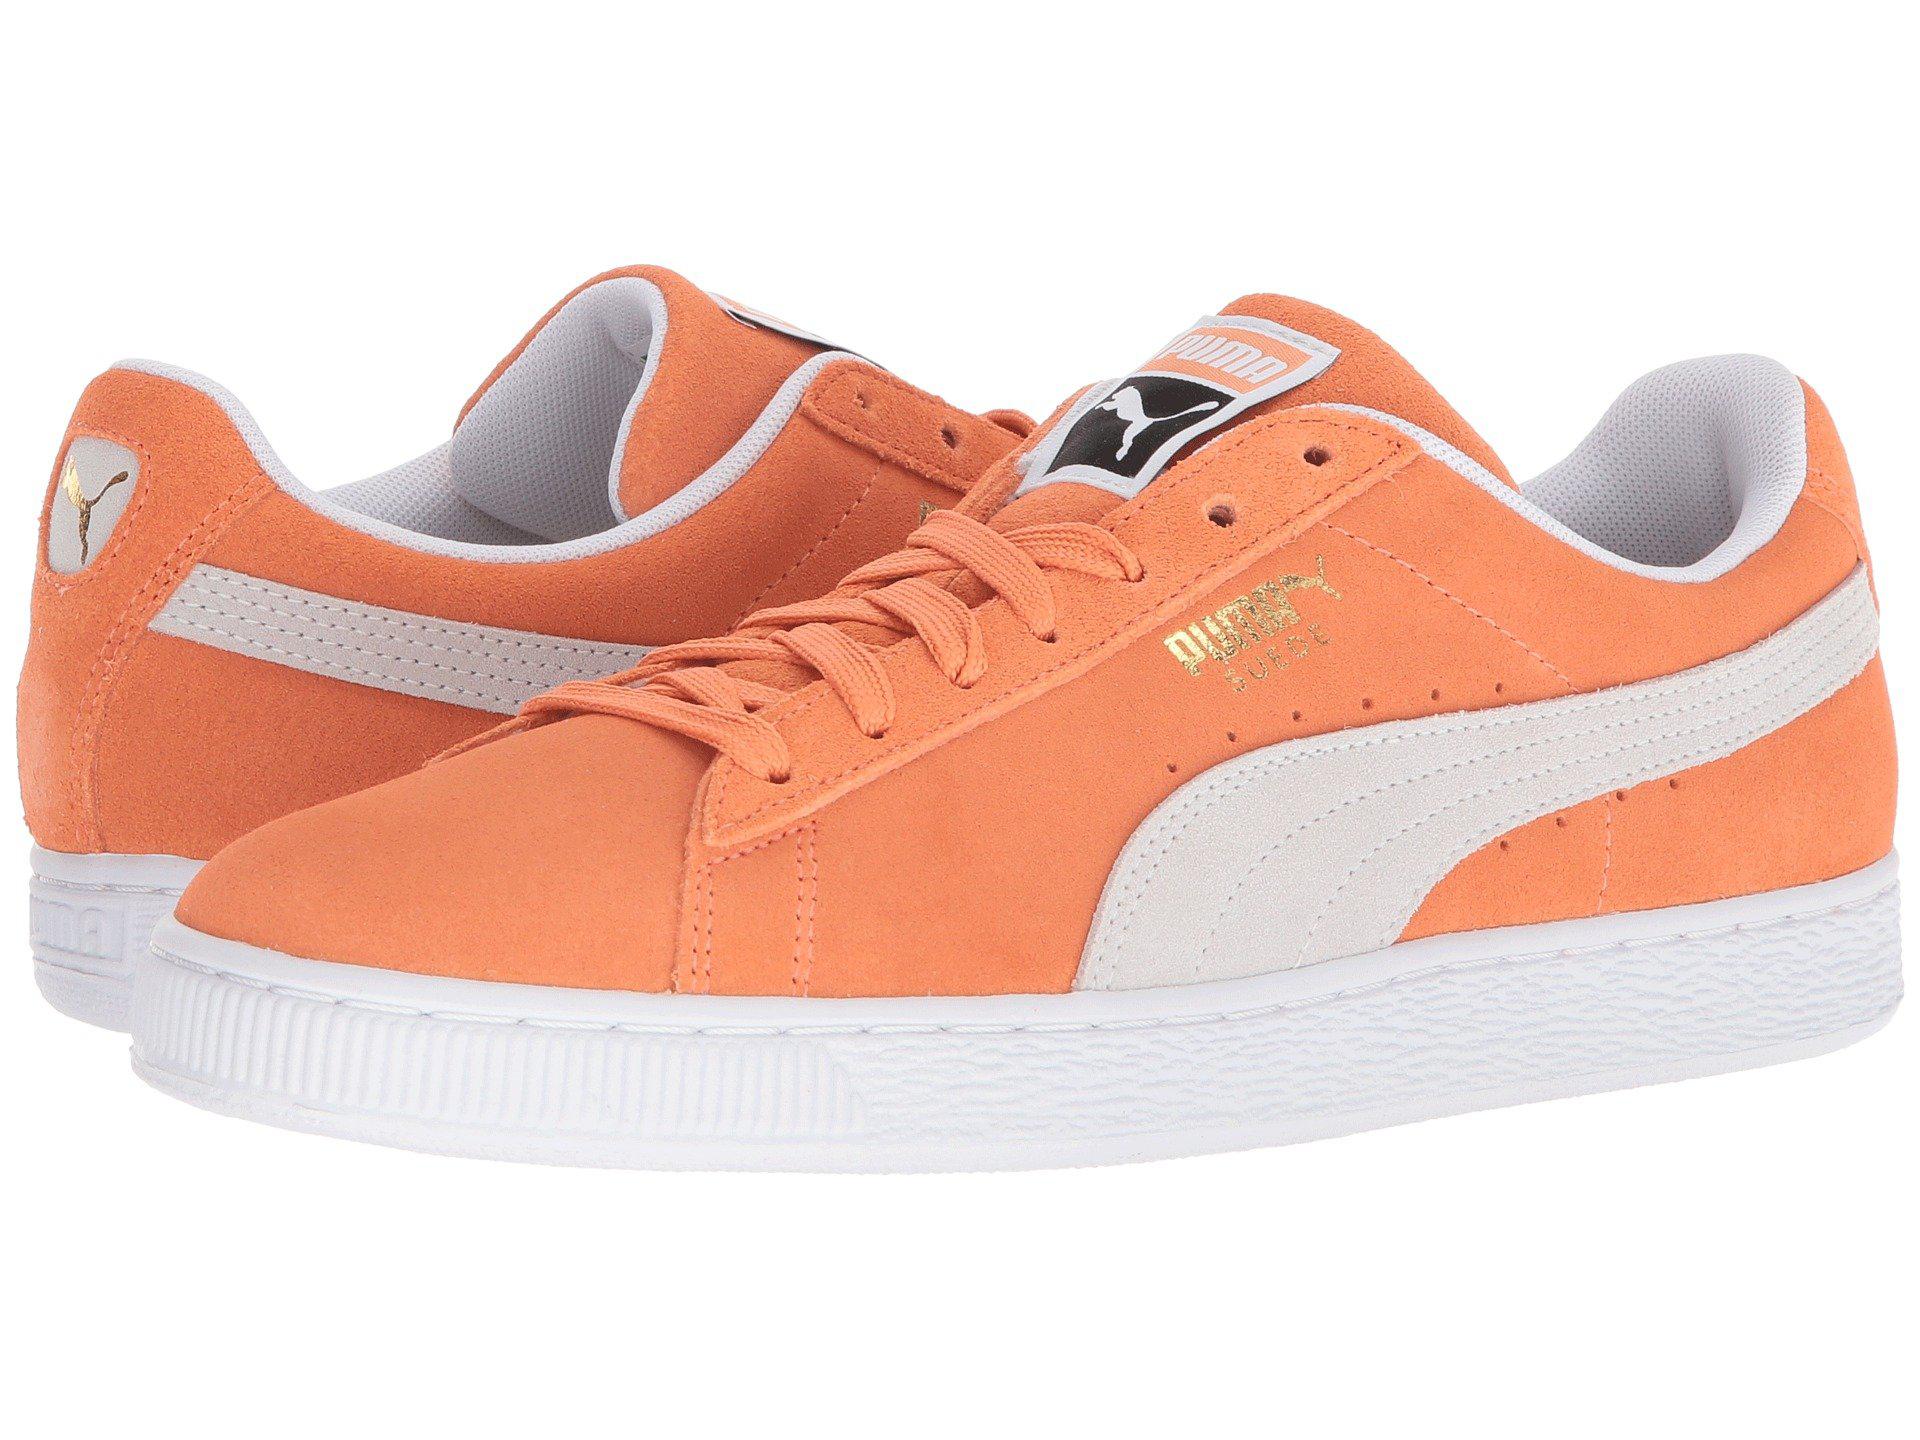 PUMA Suede Classic (melon/ White) Athletic Shoes in Orange - Lyst